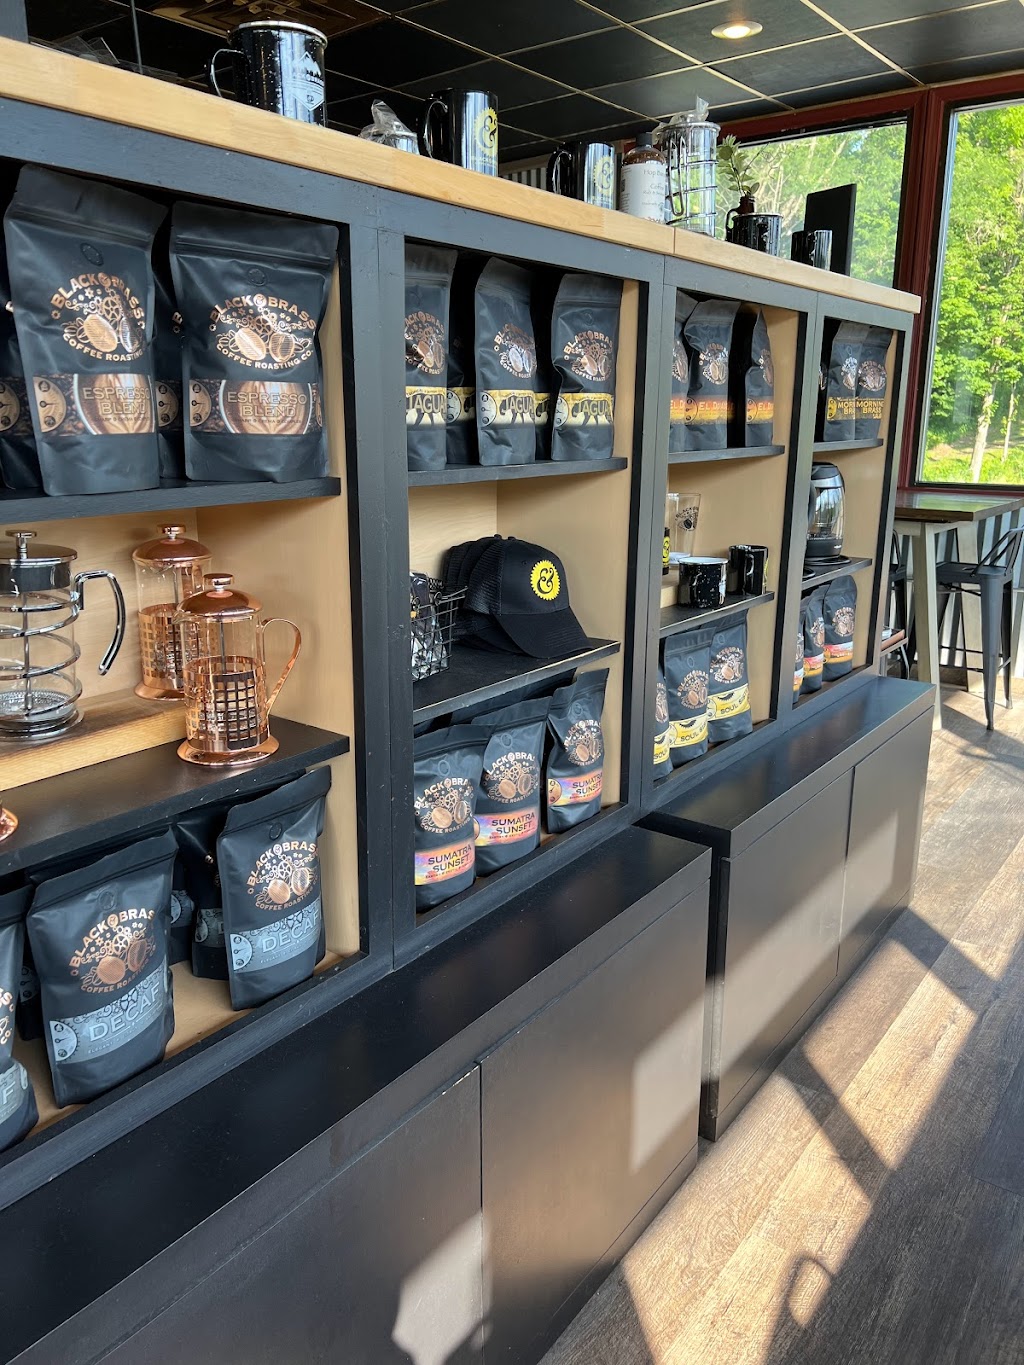 Black and Brass Coffee Roasting Company | 102 US-6, Honesdale, PA 18431 | Phone: (570) 253-1248